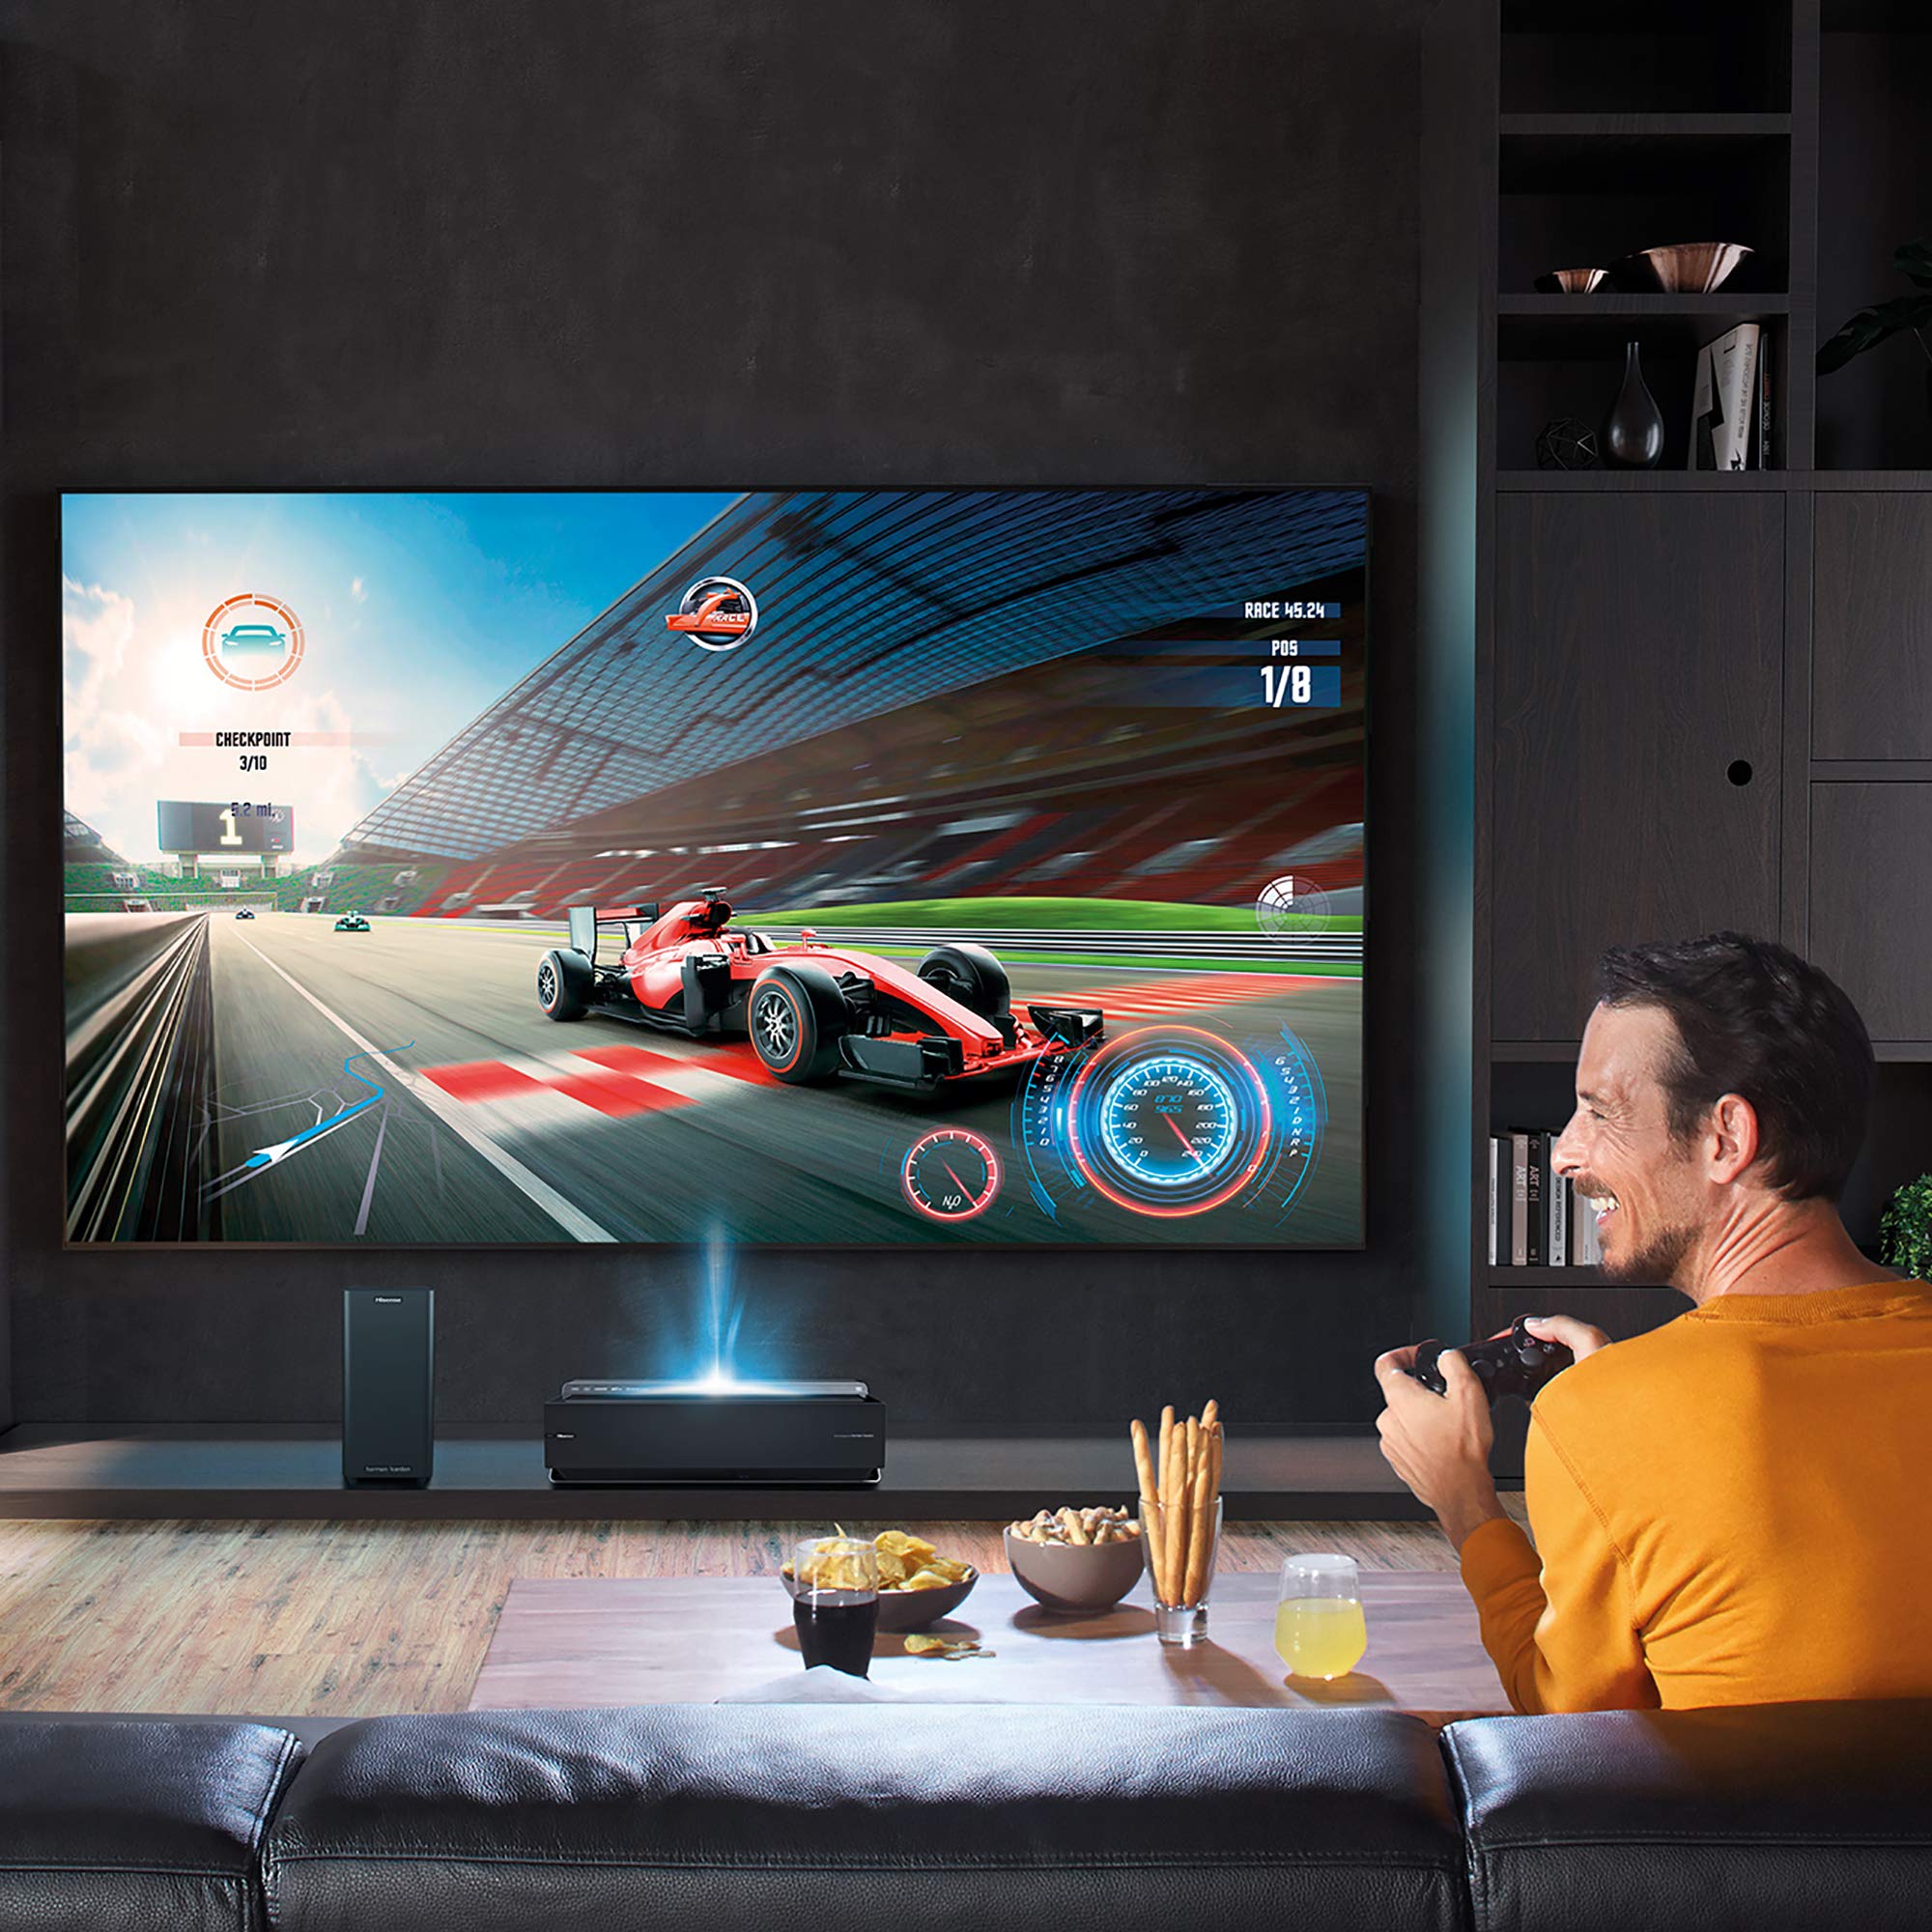 Hisense 120L10E 120-Inch 4K UHD Smart Laser Projector TV with Screen and 2.1 Audio System (2019)